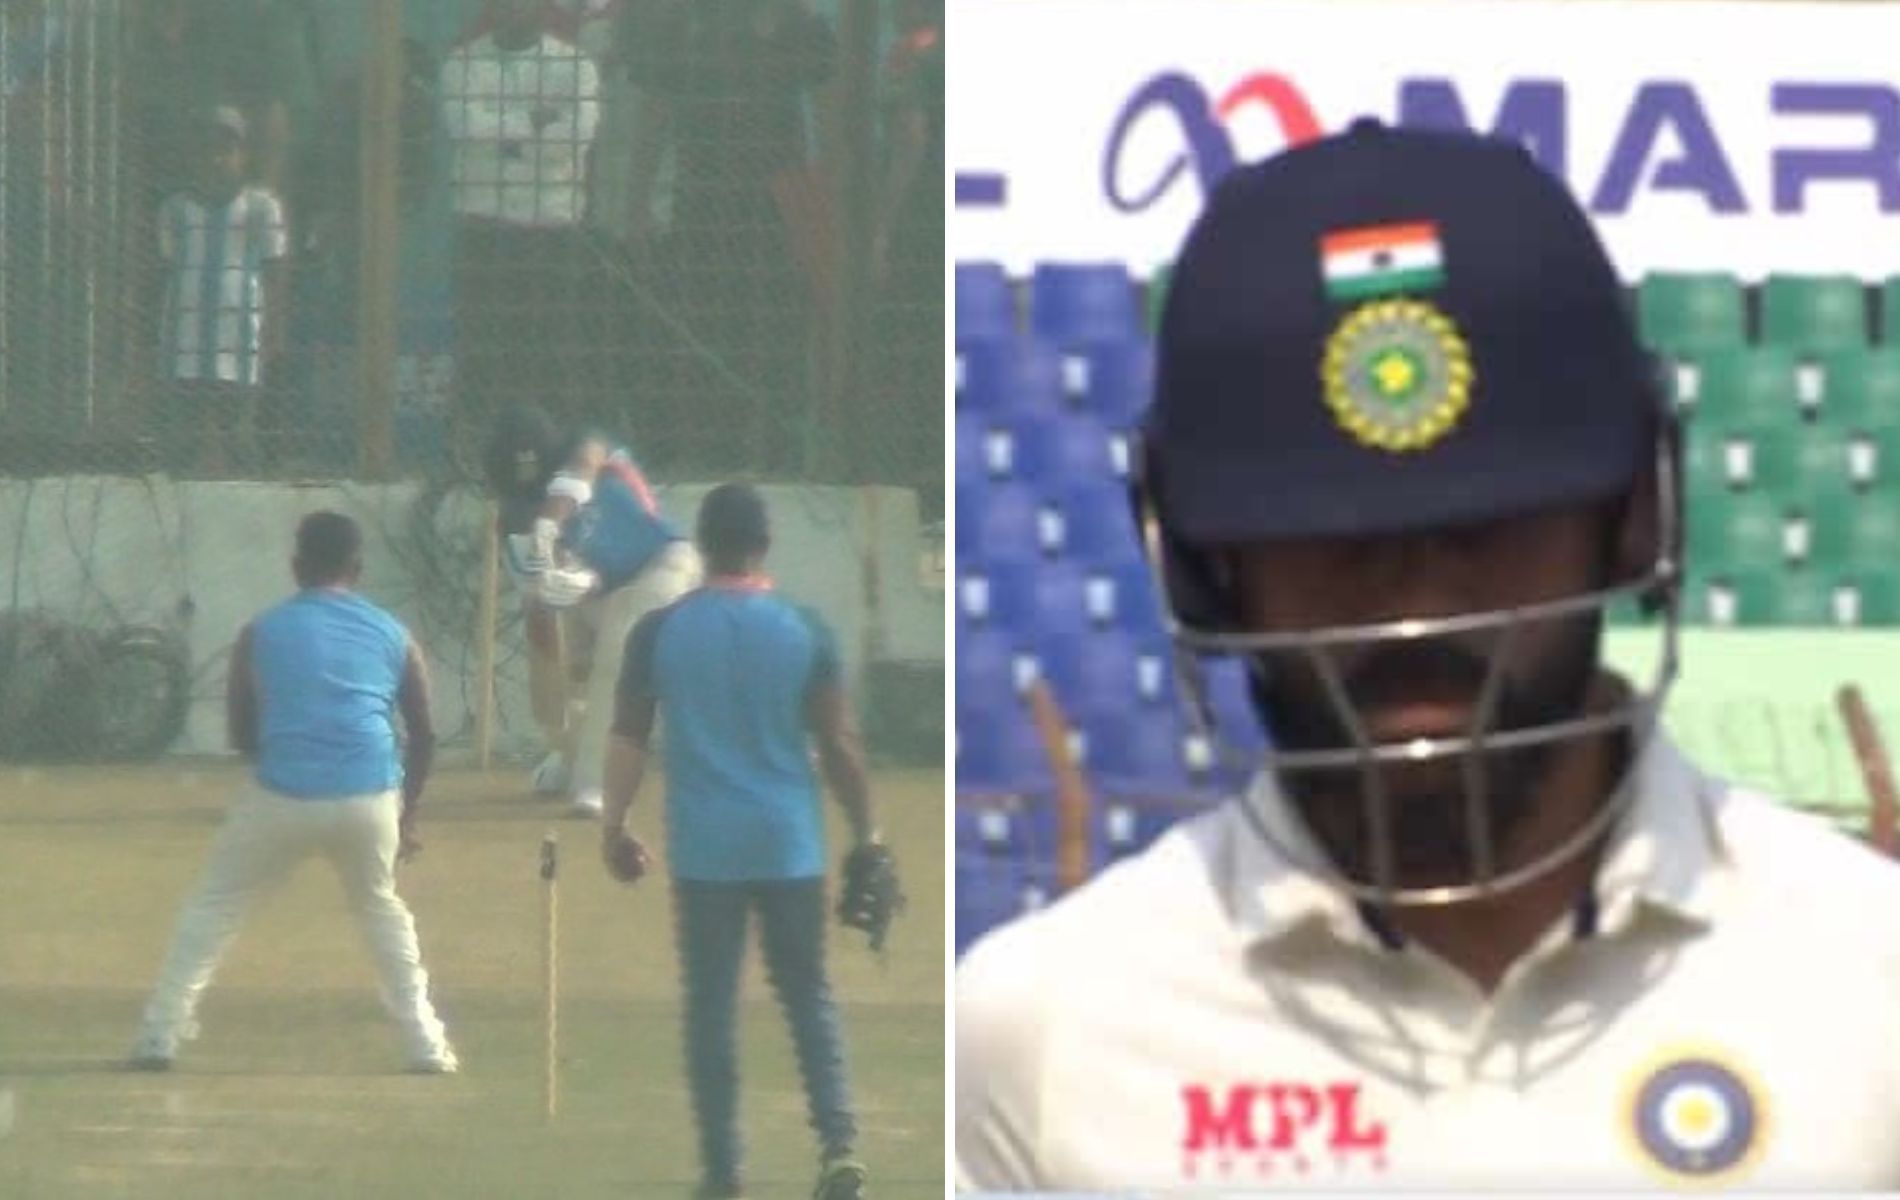 Virat Kohli was out for just one run on Wednesday. (Pics: SONY/Twitter)